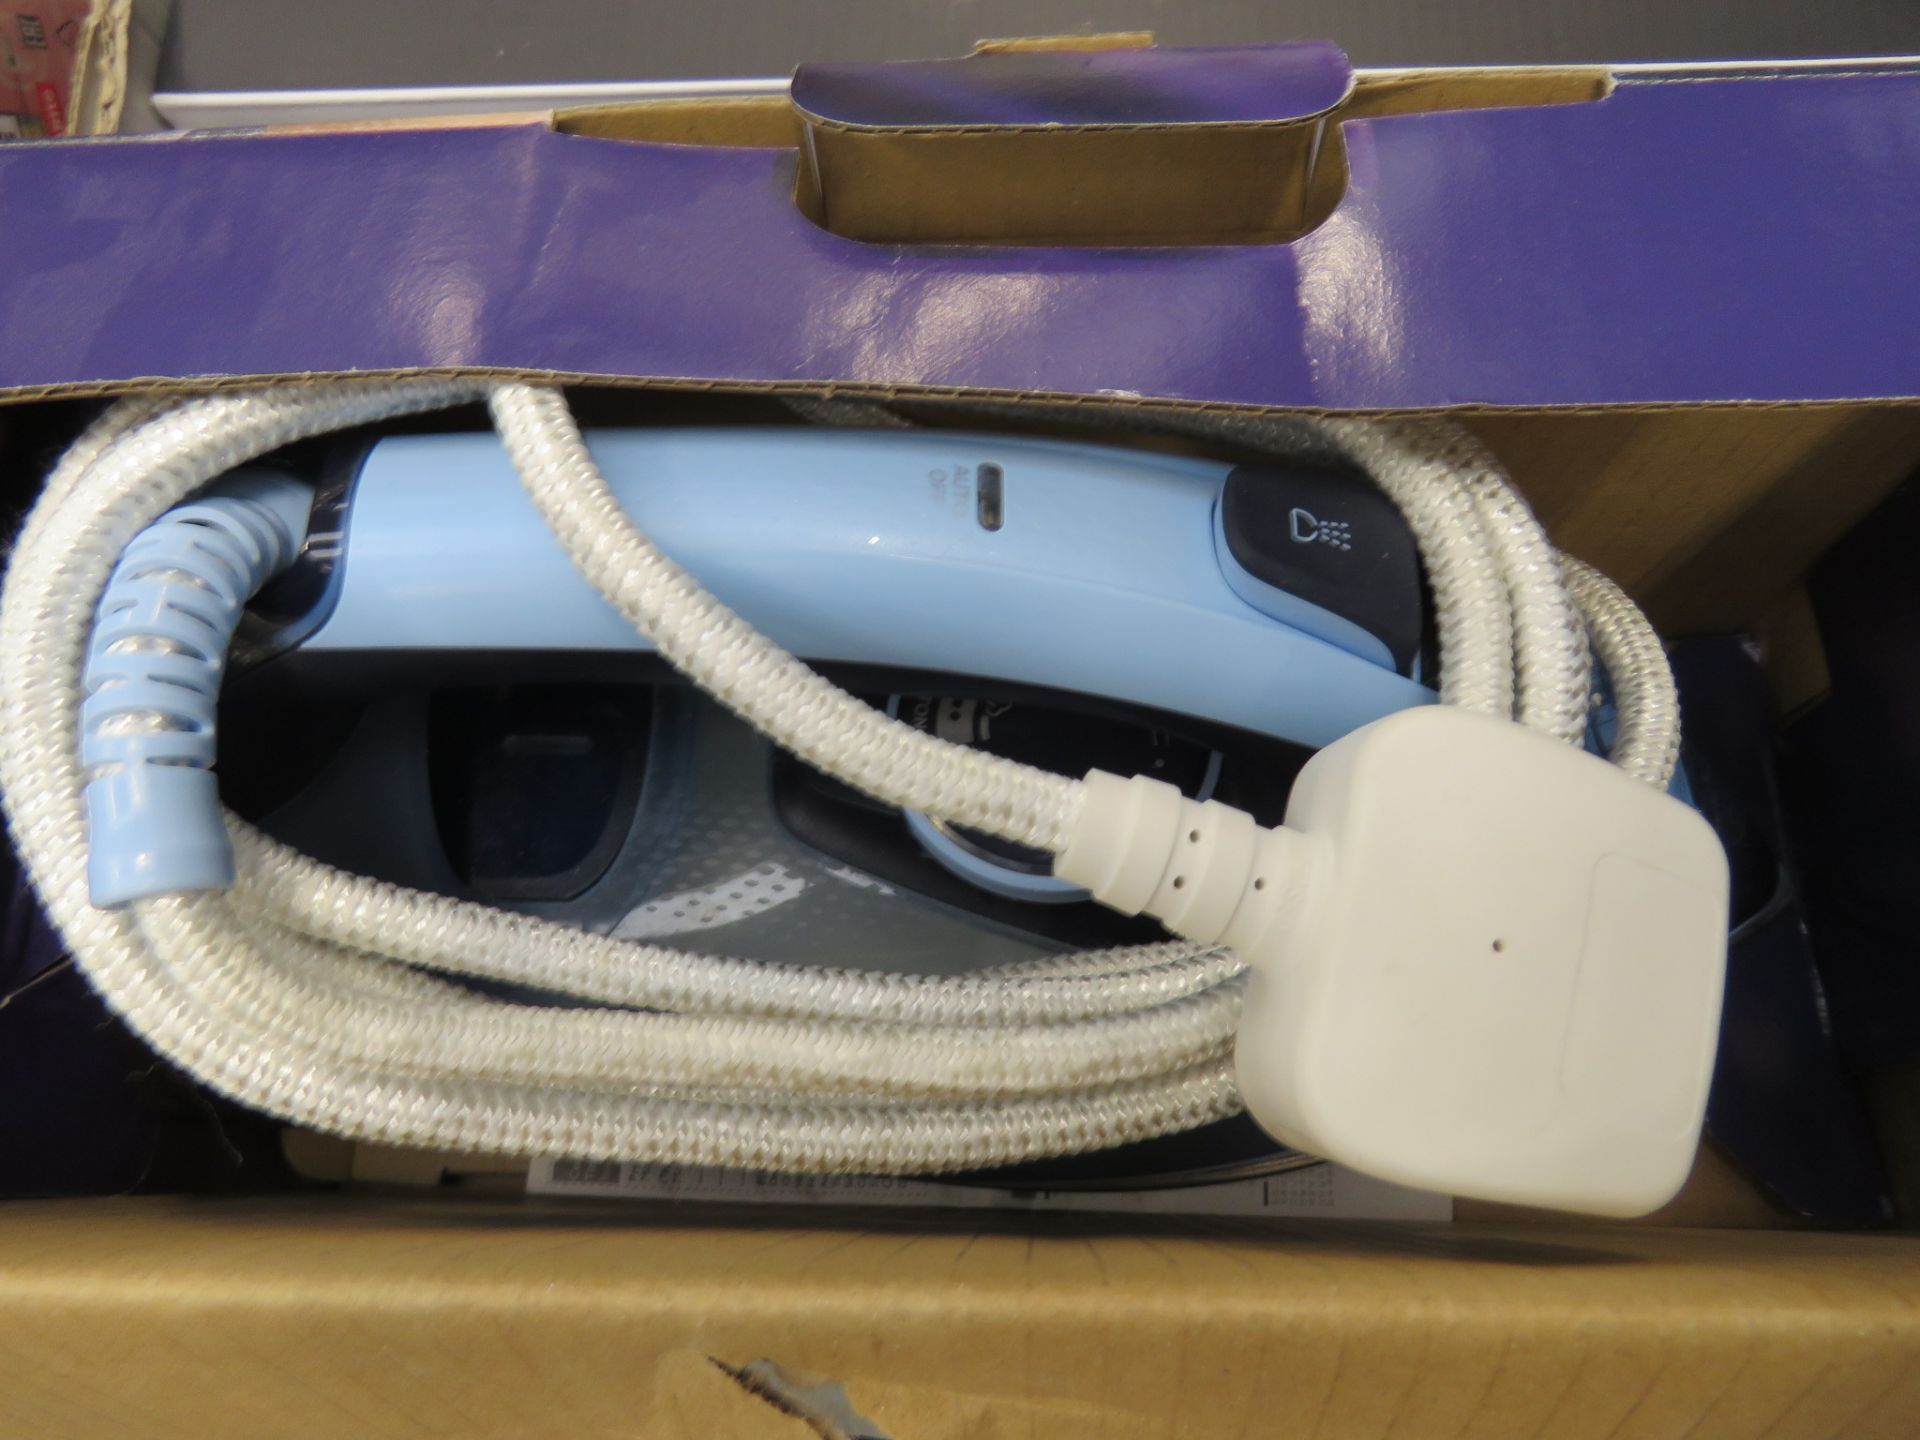 Philips hand held garment steamer, 2 cordless Philips steam irons and another steam iron - Image 3 of 3